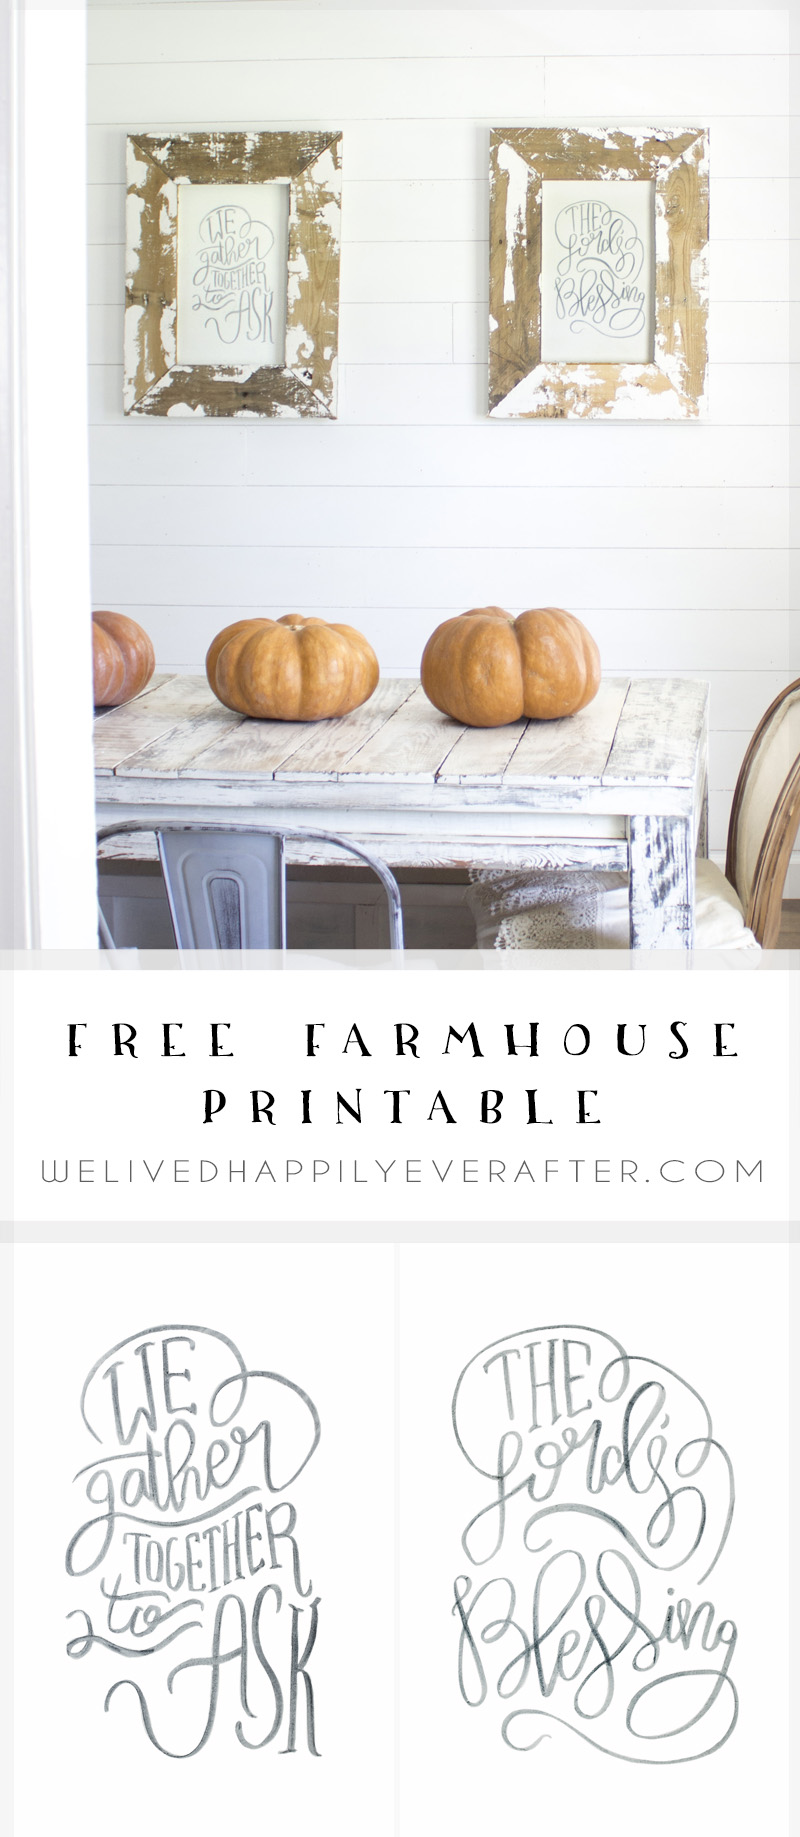 We Gather Together To Ask The Lord's Blessing - Free "Gather" Thanksgiving Hymn For An Autumn Farmhouse (October & November Fall Printables)